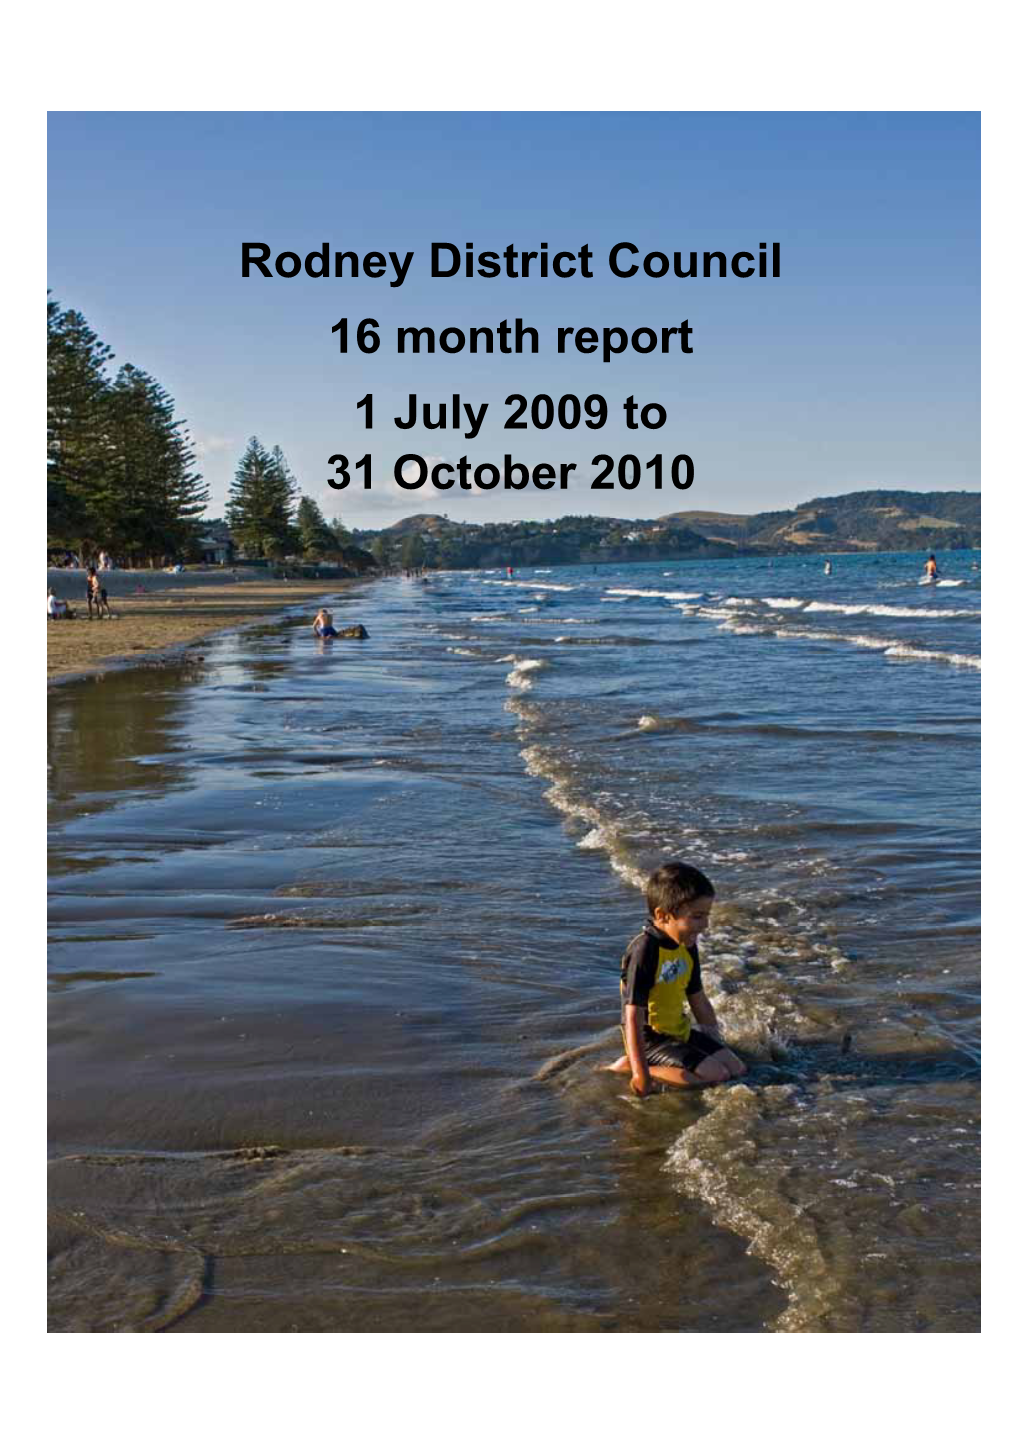 Rodney District Council Annual Report 2009-2010